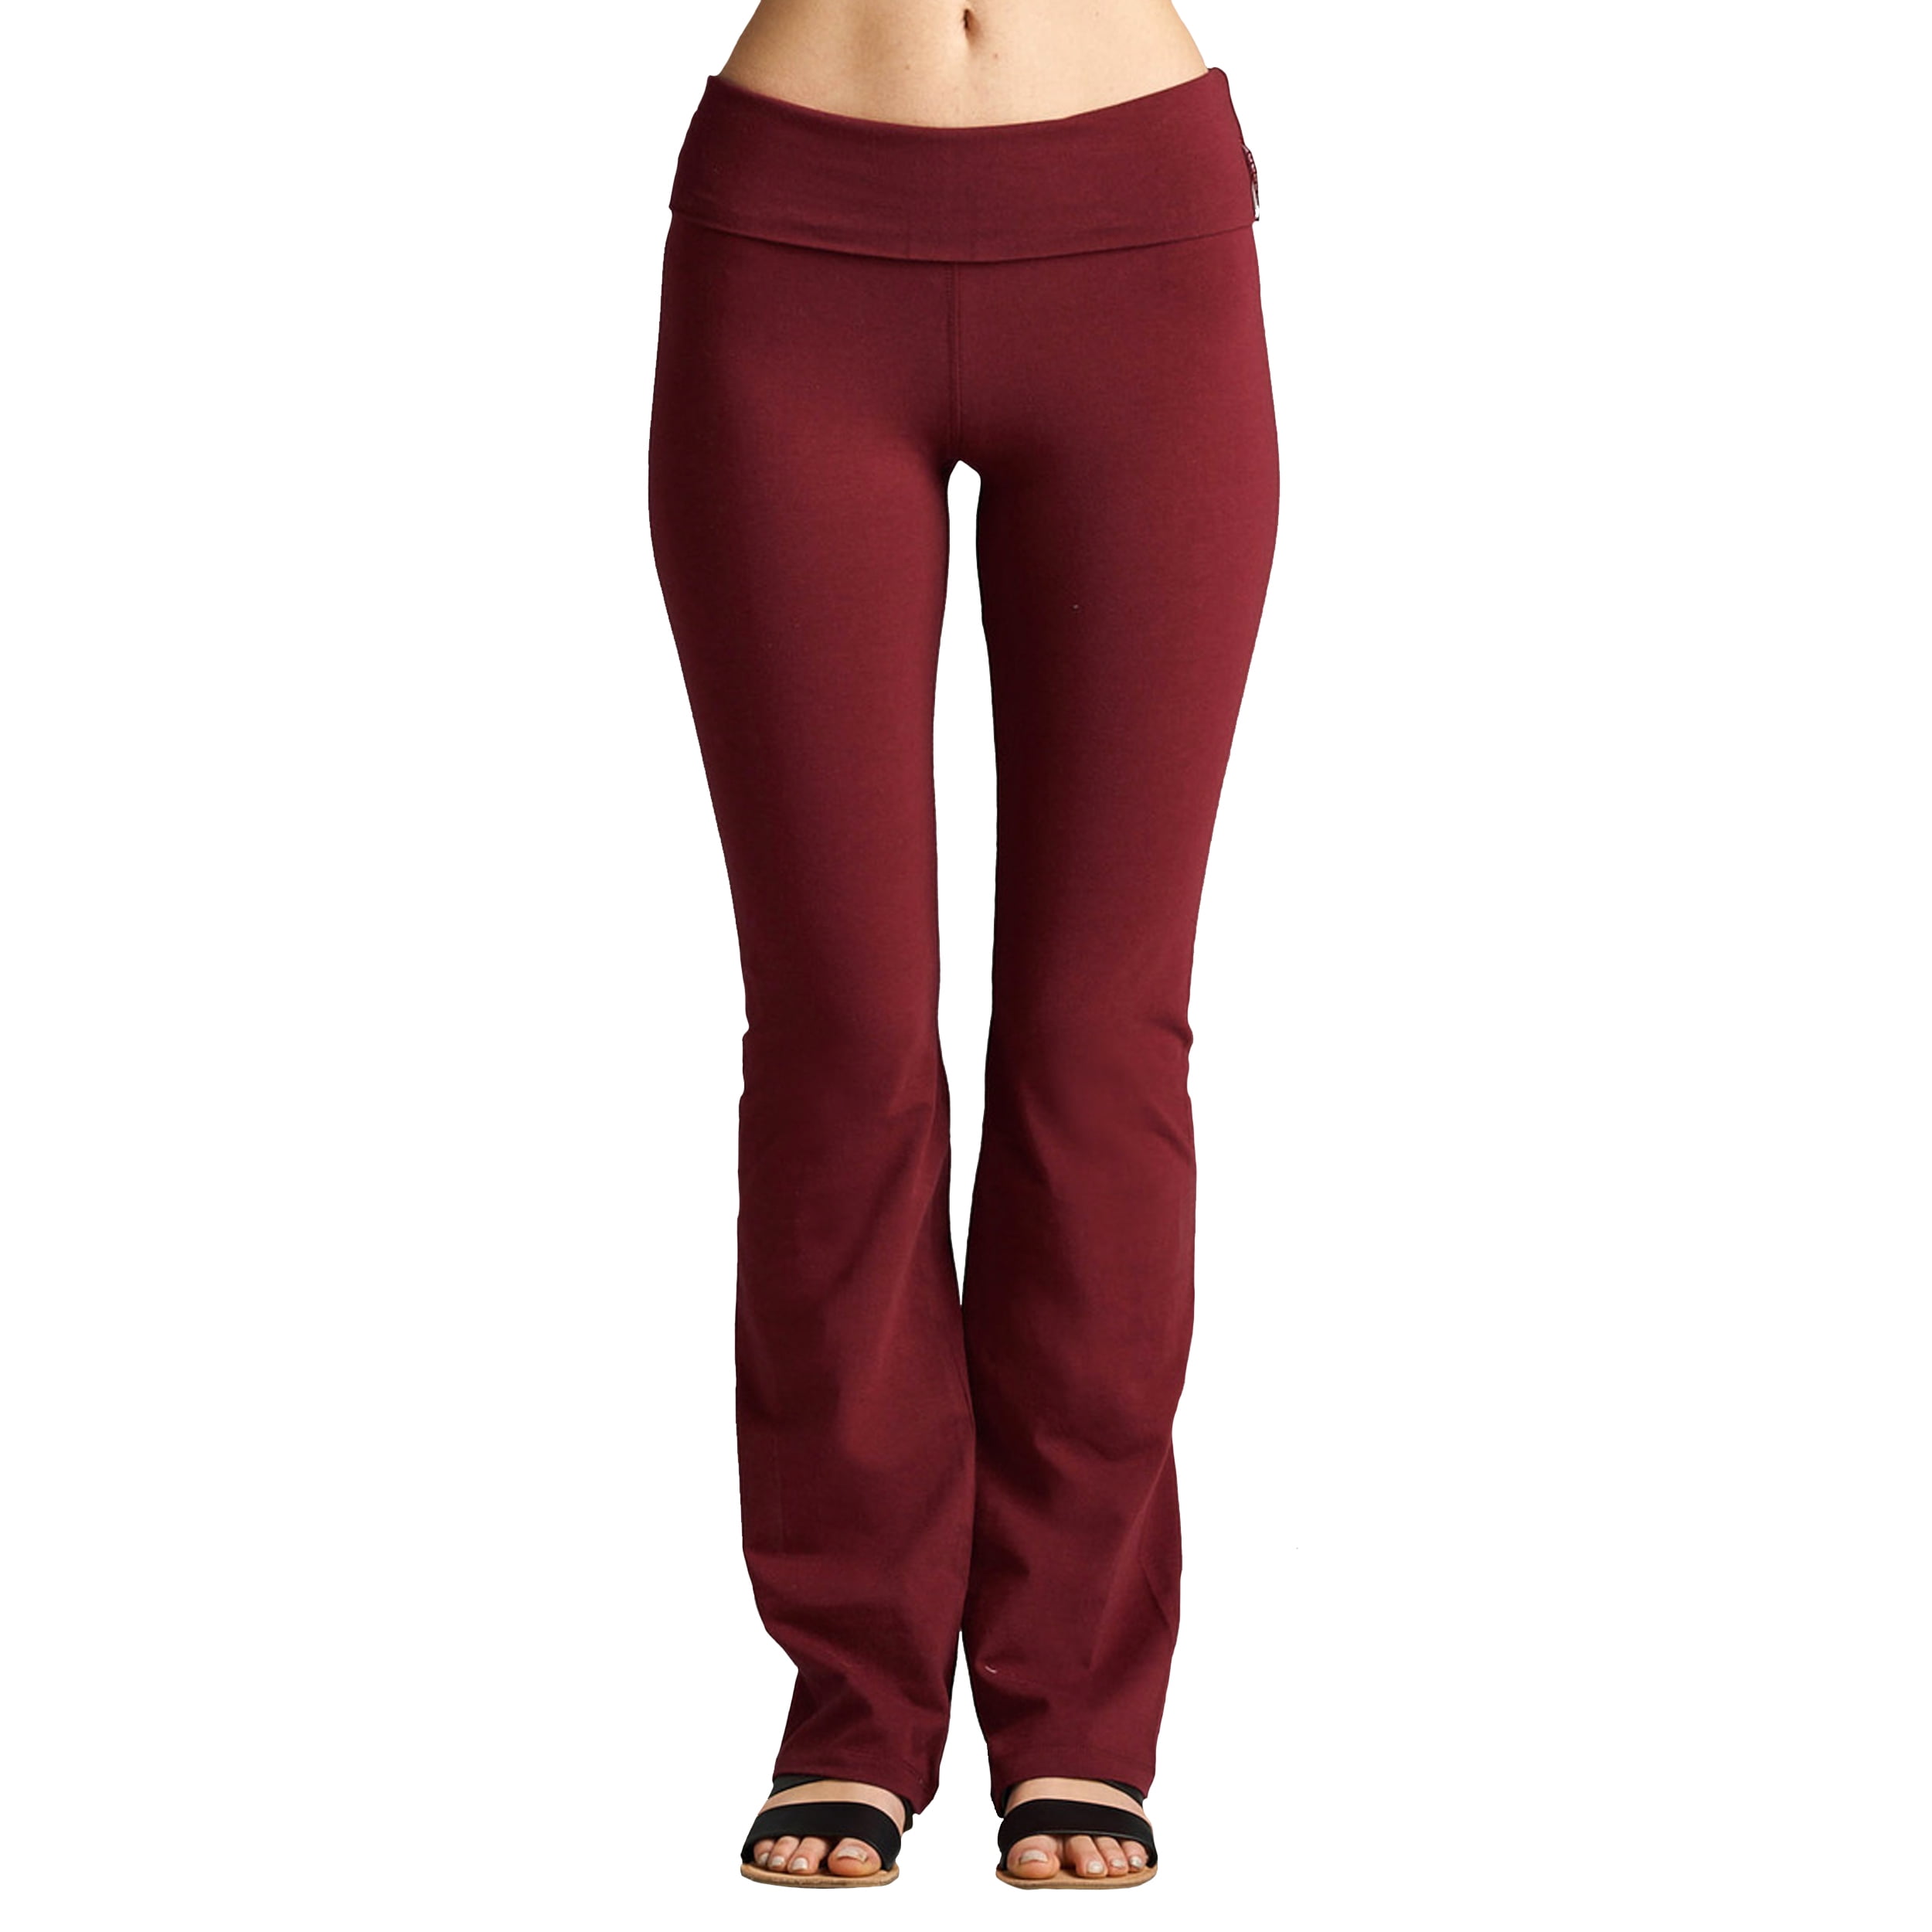 Women's New Yoga Athletic Foldover Stretch Comfy Lounge Flare Fit Pants ...